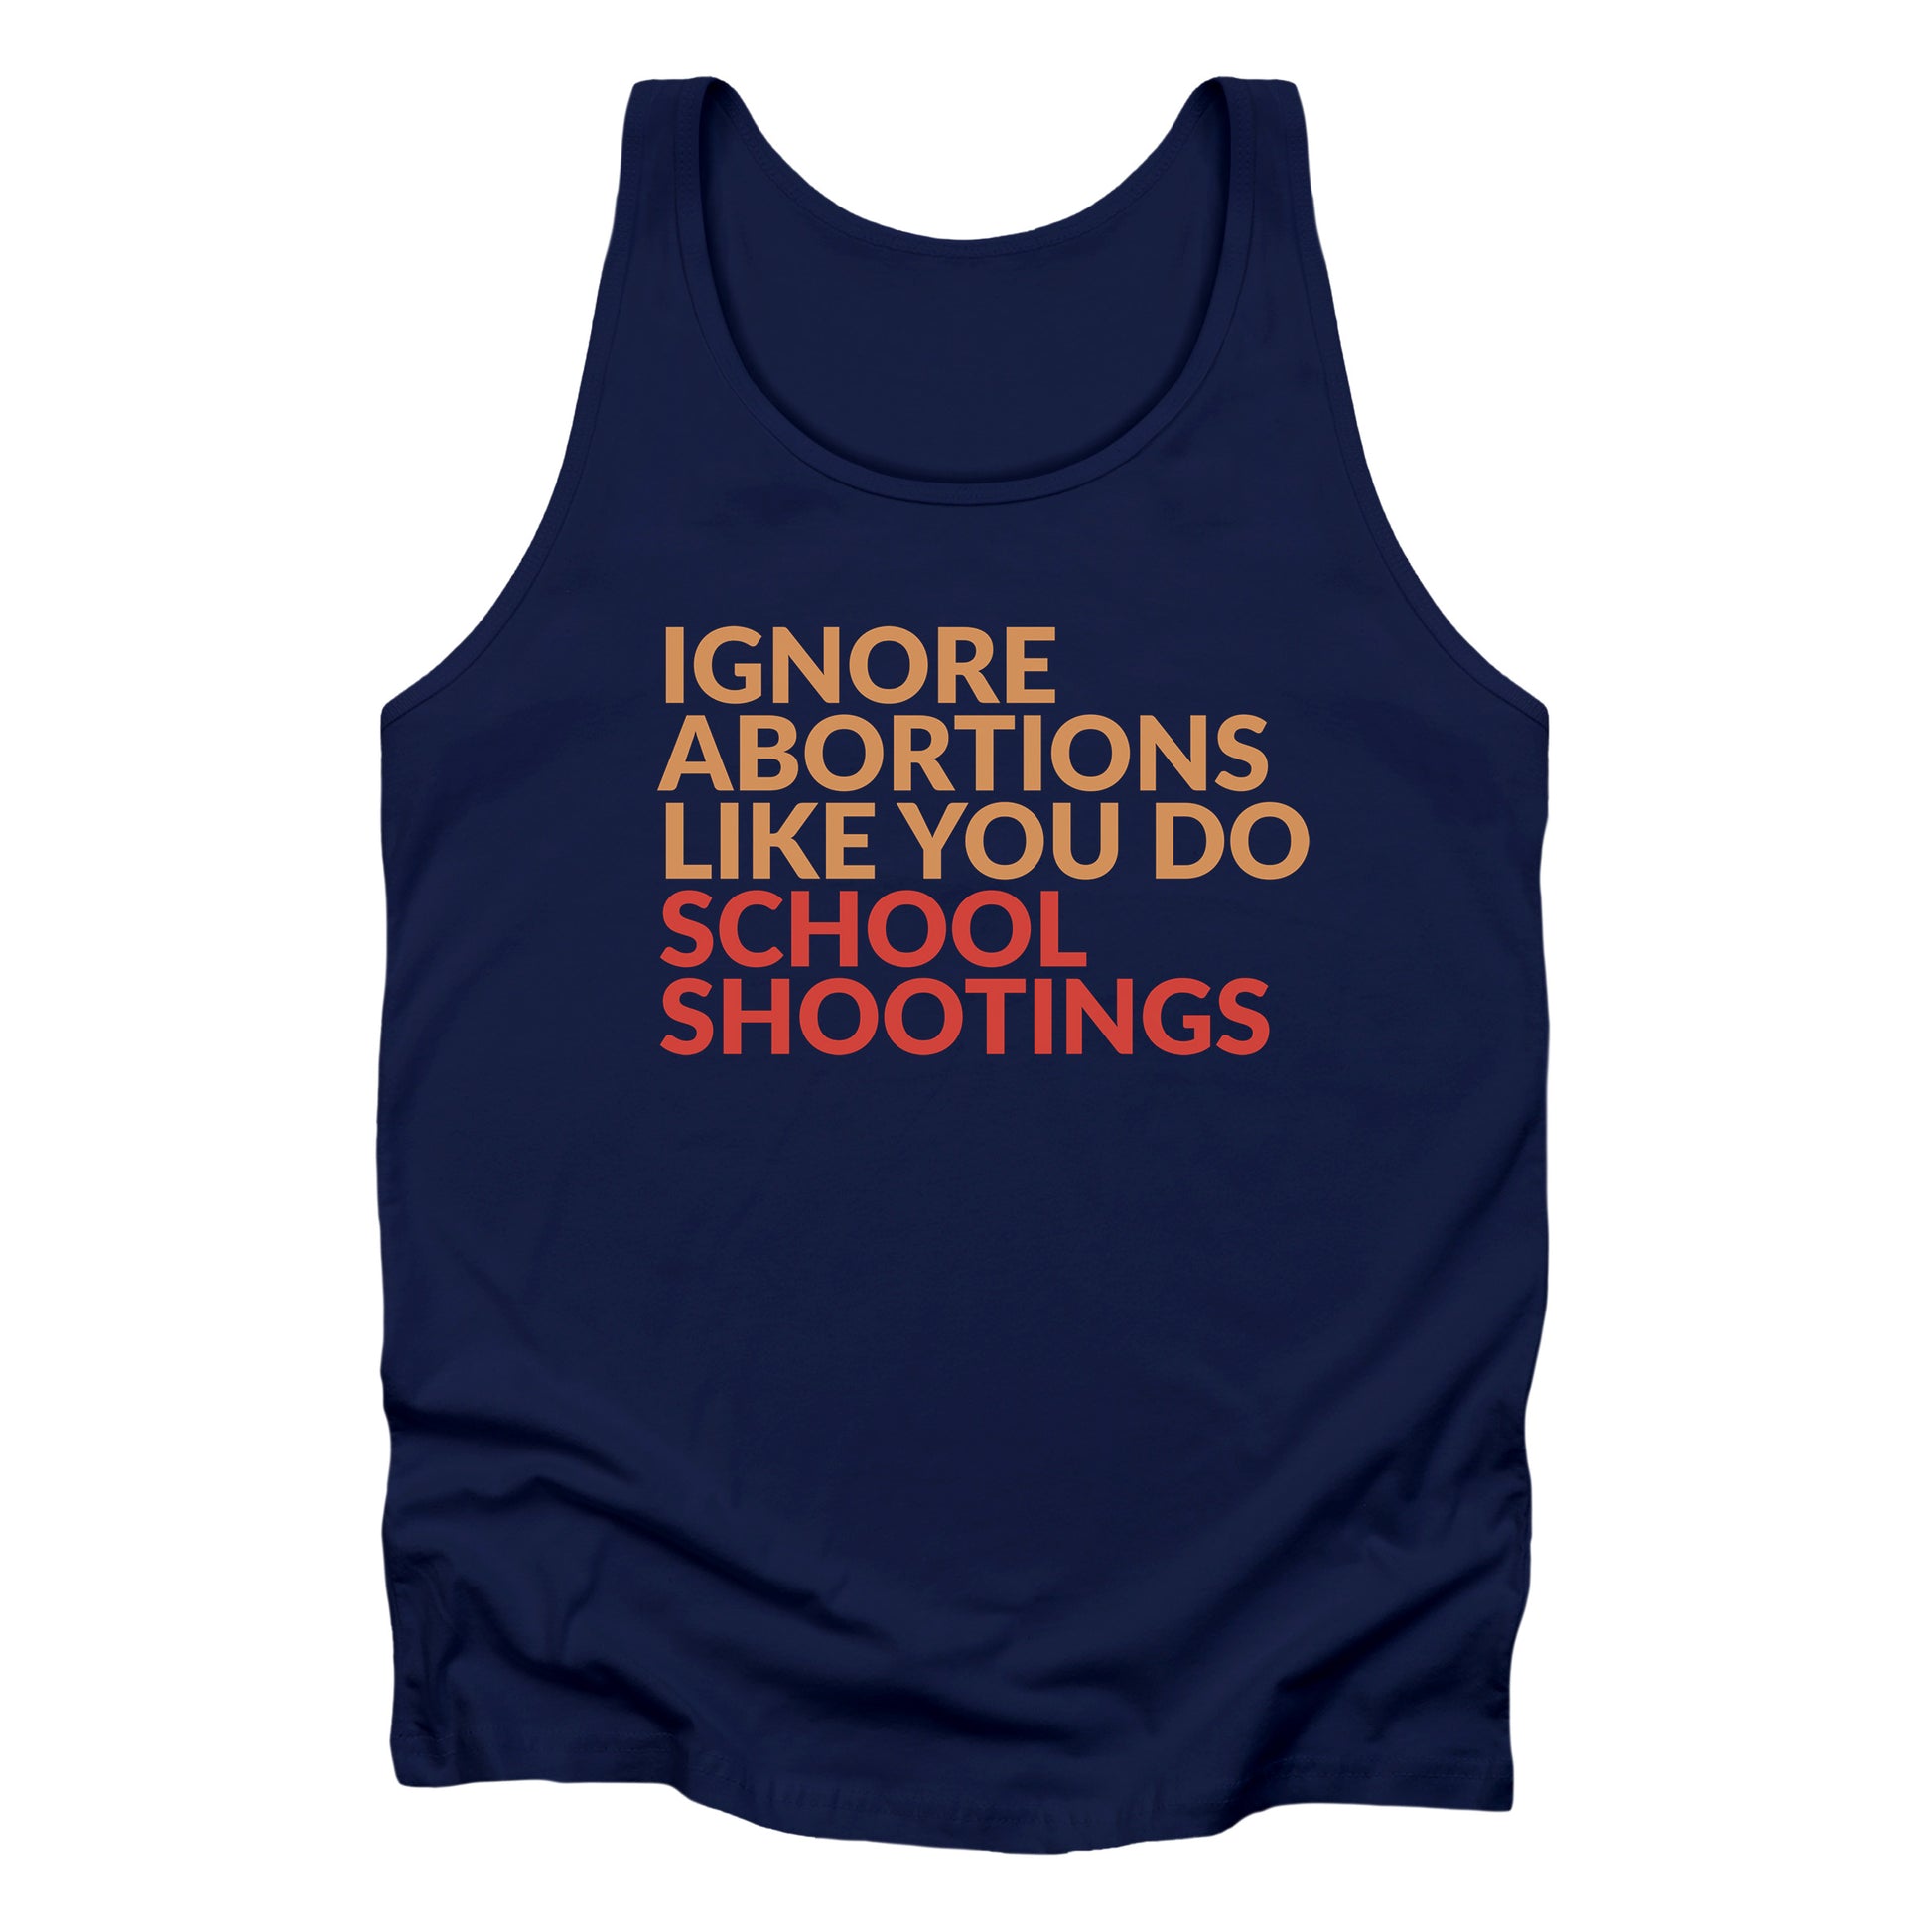 Navy blue tank top that says “Ignore abortions like you do school shootings” in all caps in an orange font. The words “school shootings” are in red.